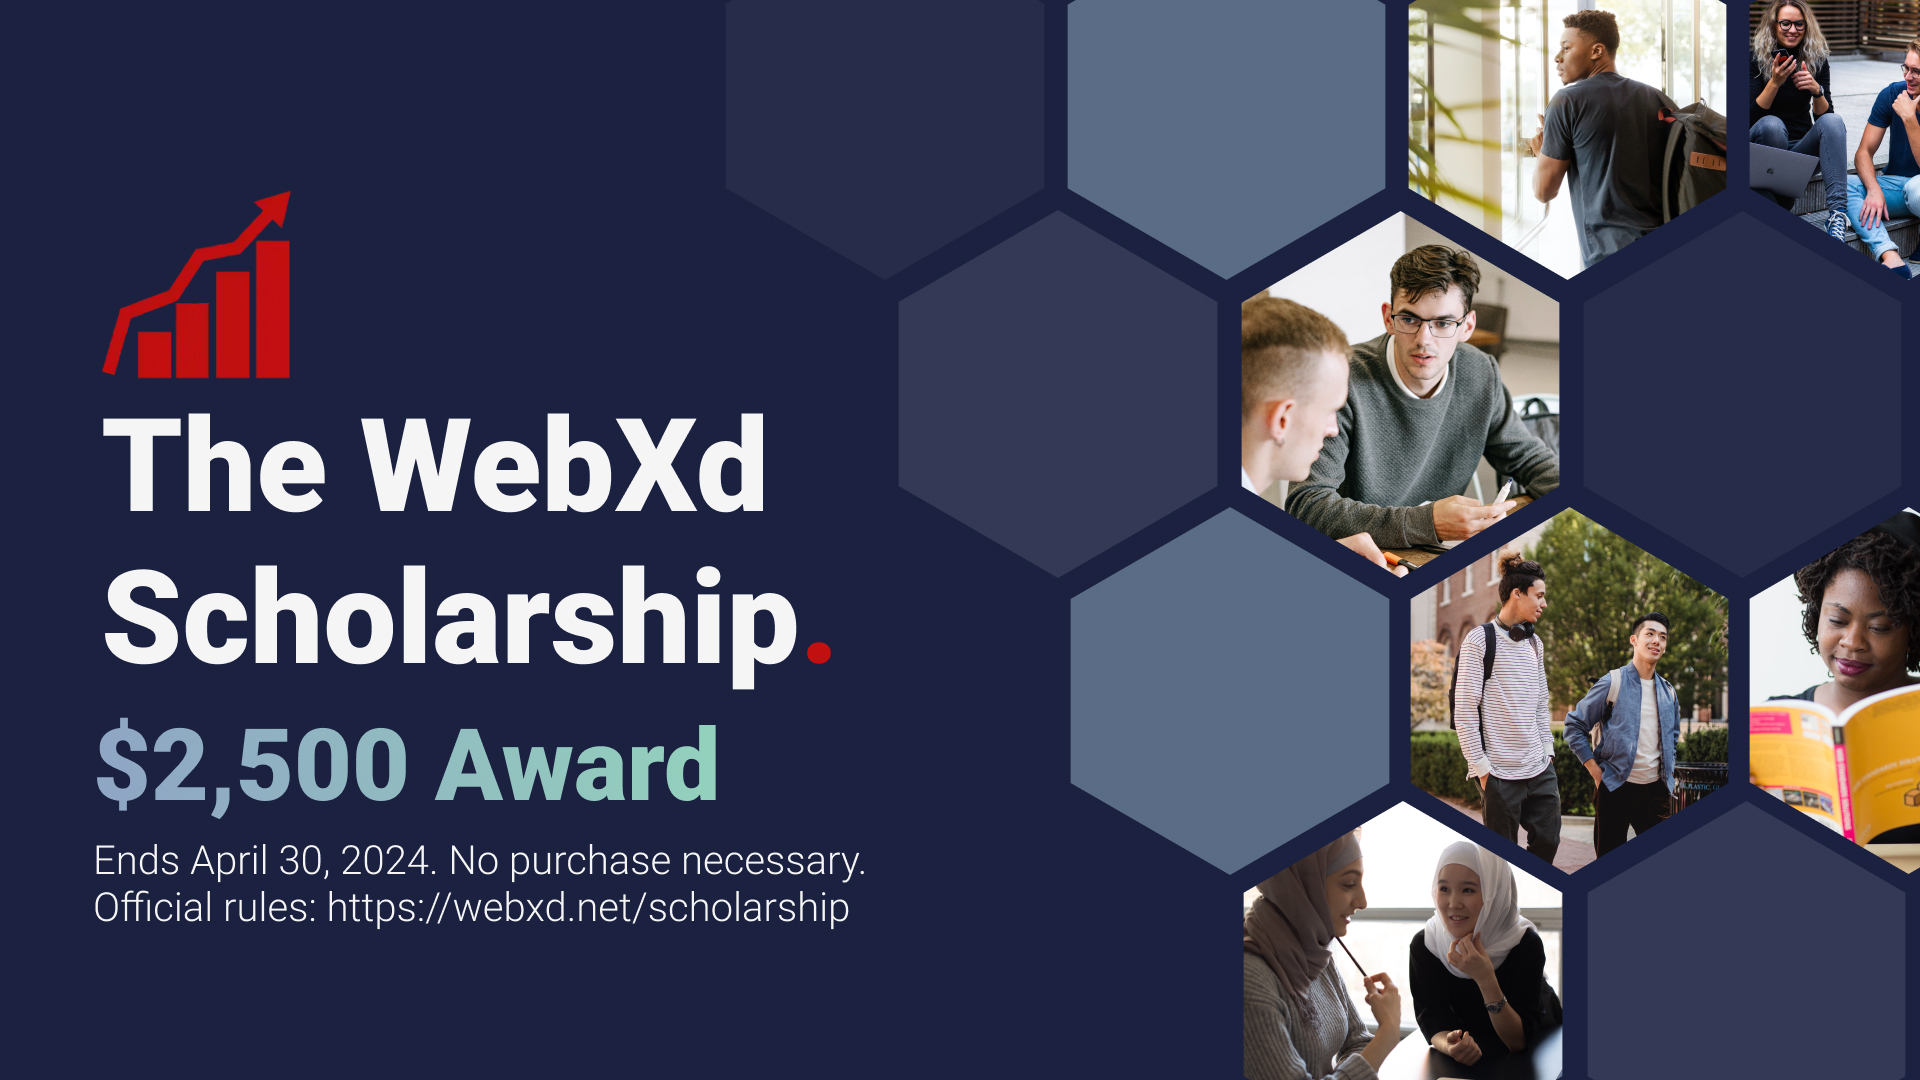 The WebXd Scholarship Application